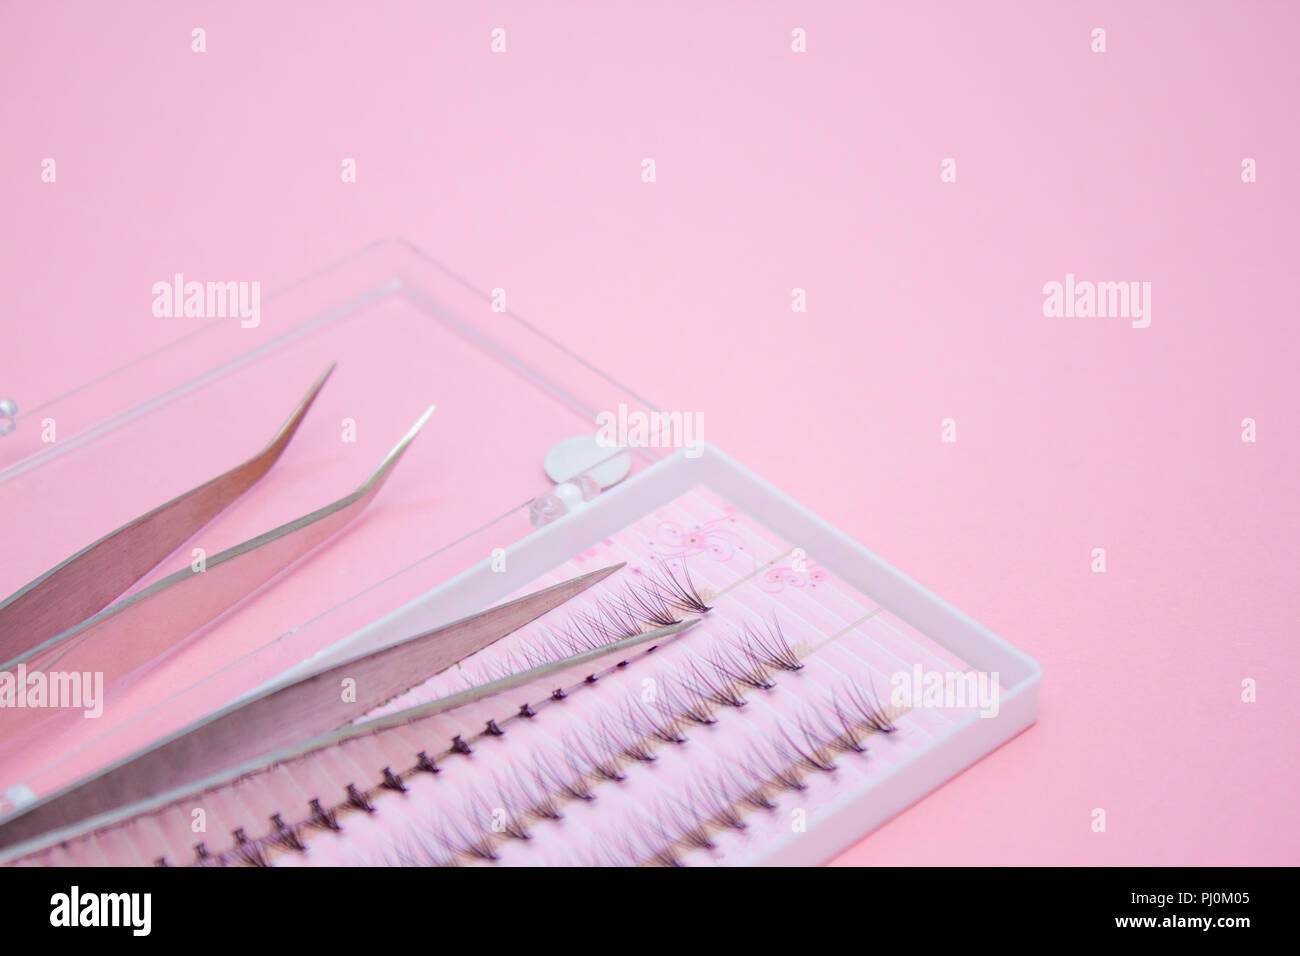 Download Beauty And Fashion Concept Tools For Eyelash Extension Procedure Two Tweezers And Box With False Lashes On Pink Background Copyspace Mockup Stock Photo Alamy